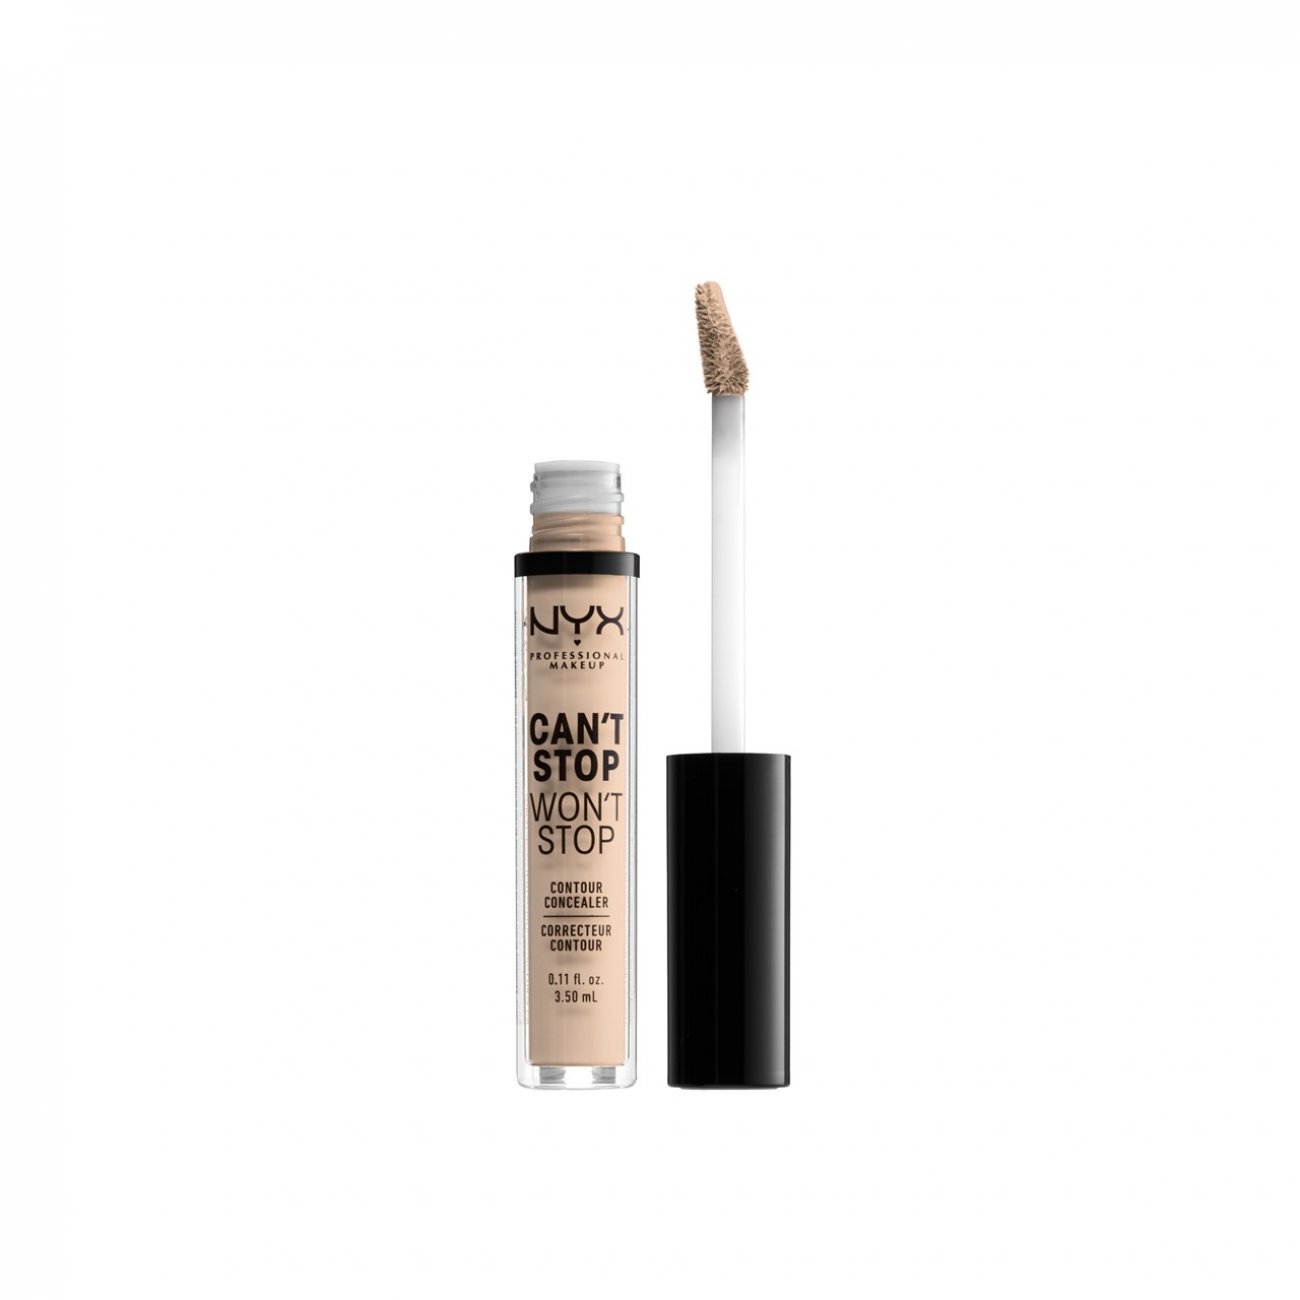 tale Automatisk gennemsnit Buy NYX Pro Makeup Can't Stop Won't Stop Concealer · USA